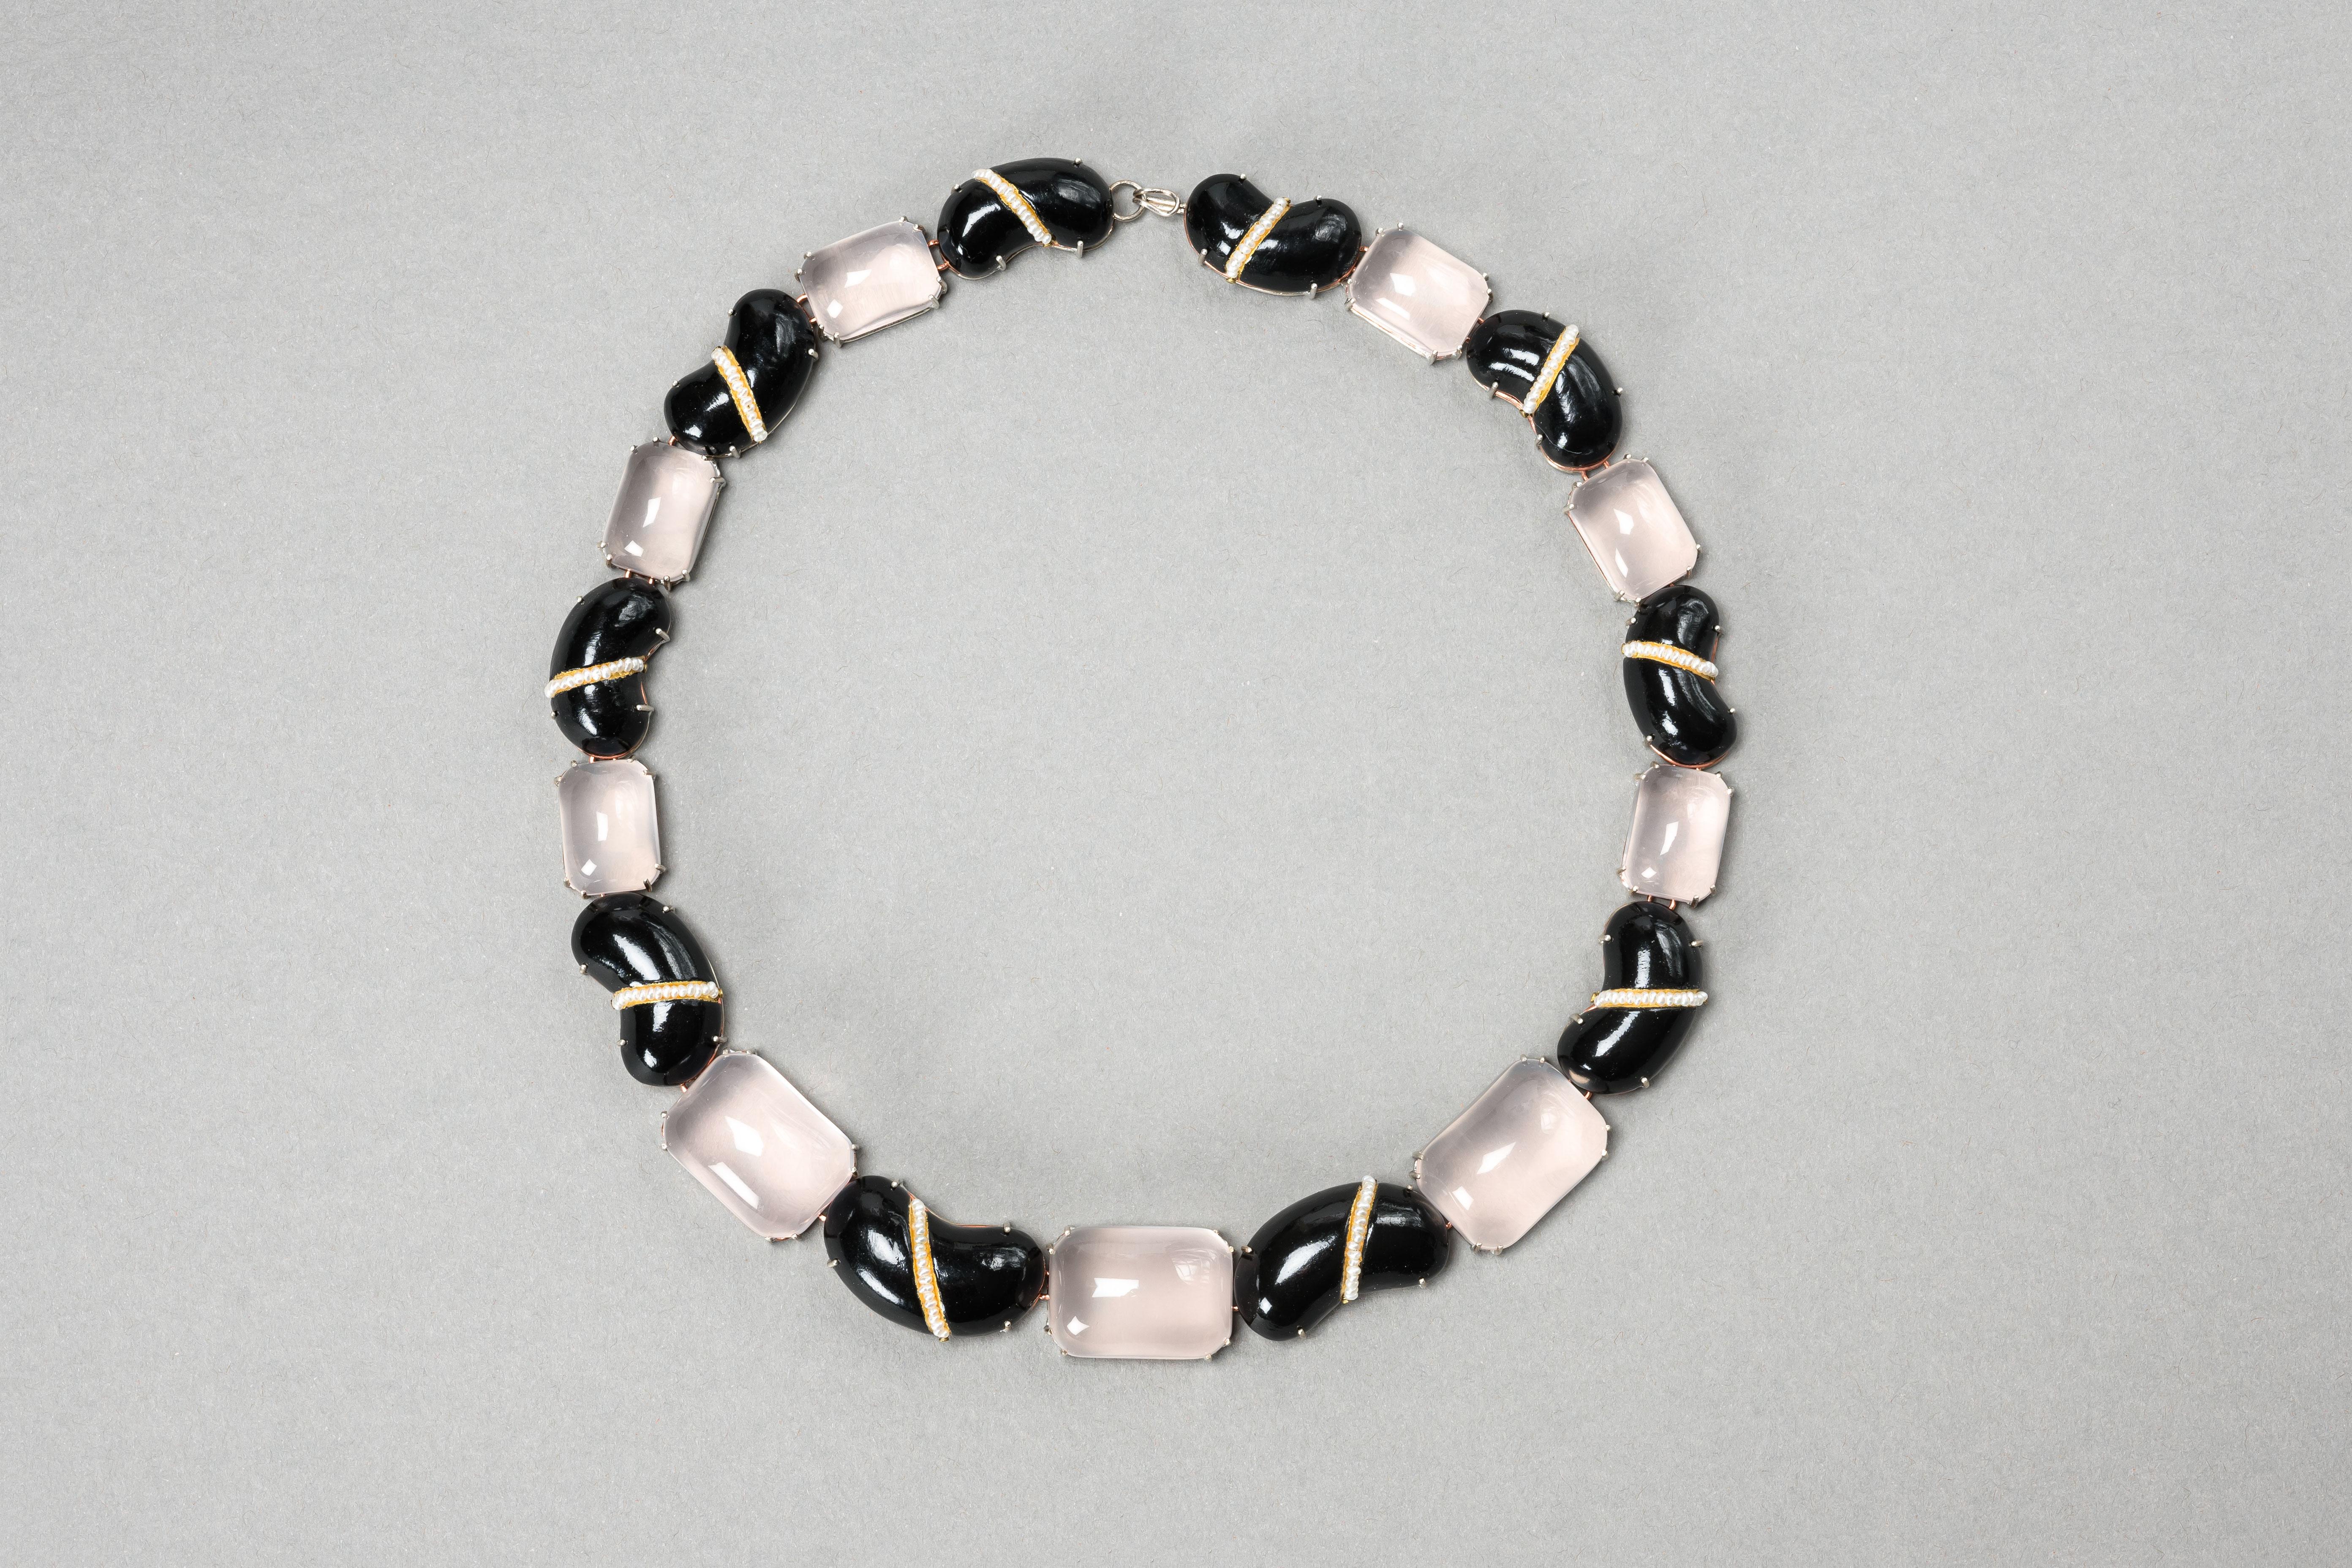 Necklace “Faba”, 2023 , is a one-of-a-kind contemporary author jewelry by italian artist Gian Luca Bartellone.
Materials: papier-mâché, silver, copper, rose quartz, pearls, gold leaf 22kt.

Sober but rich elegance – this style will get you noticed!